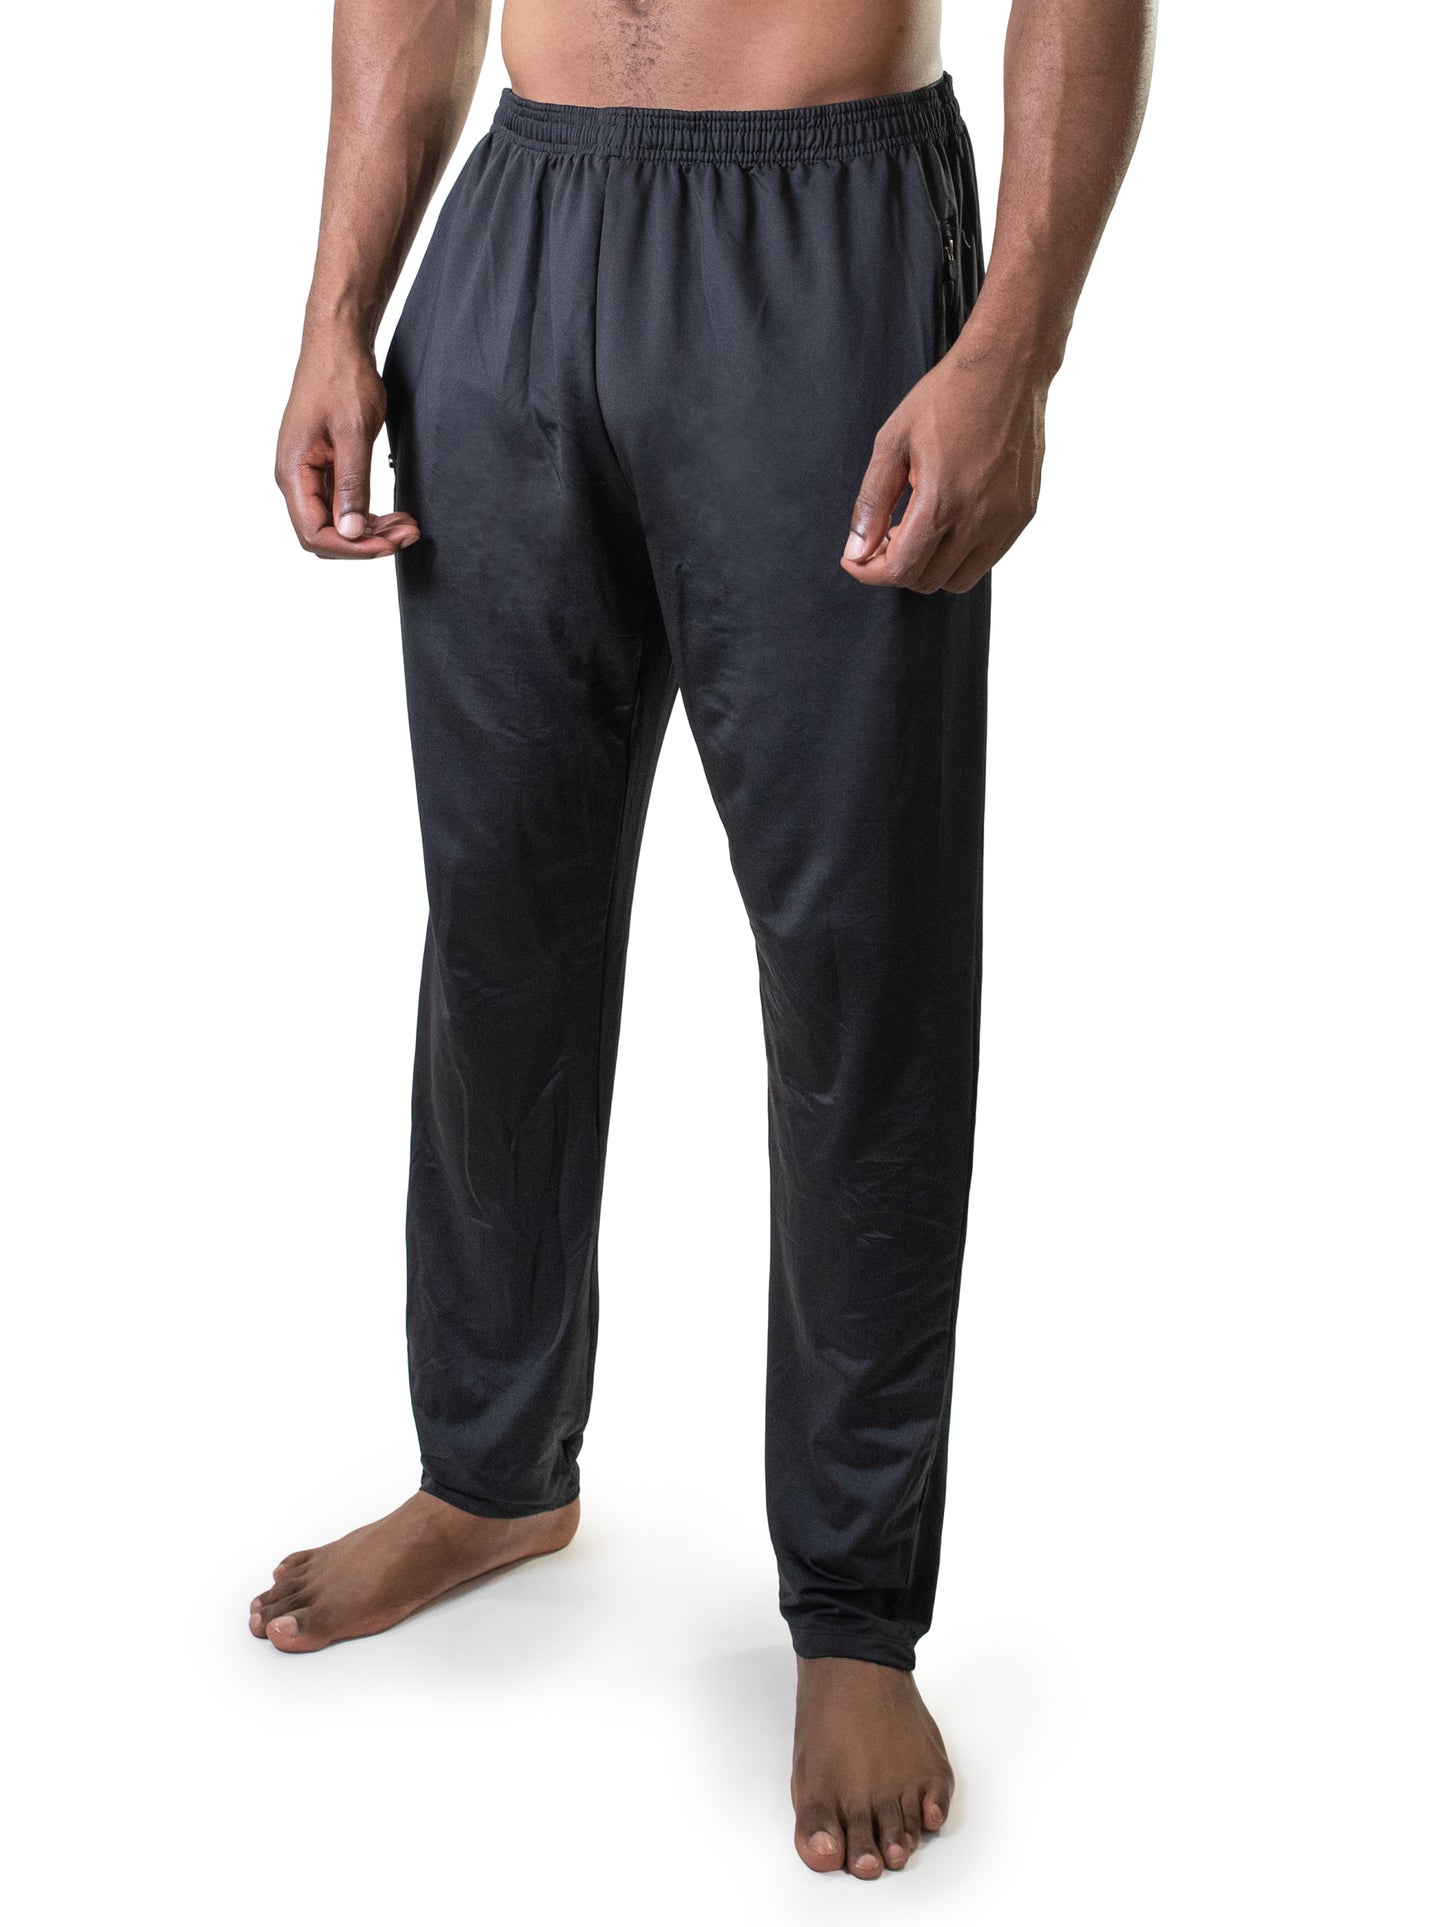 Young USA® Men's Fitness Pants